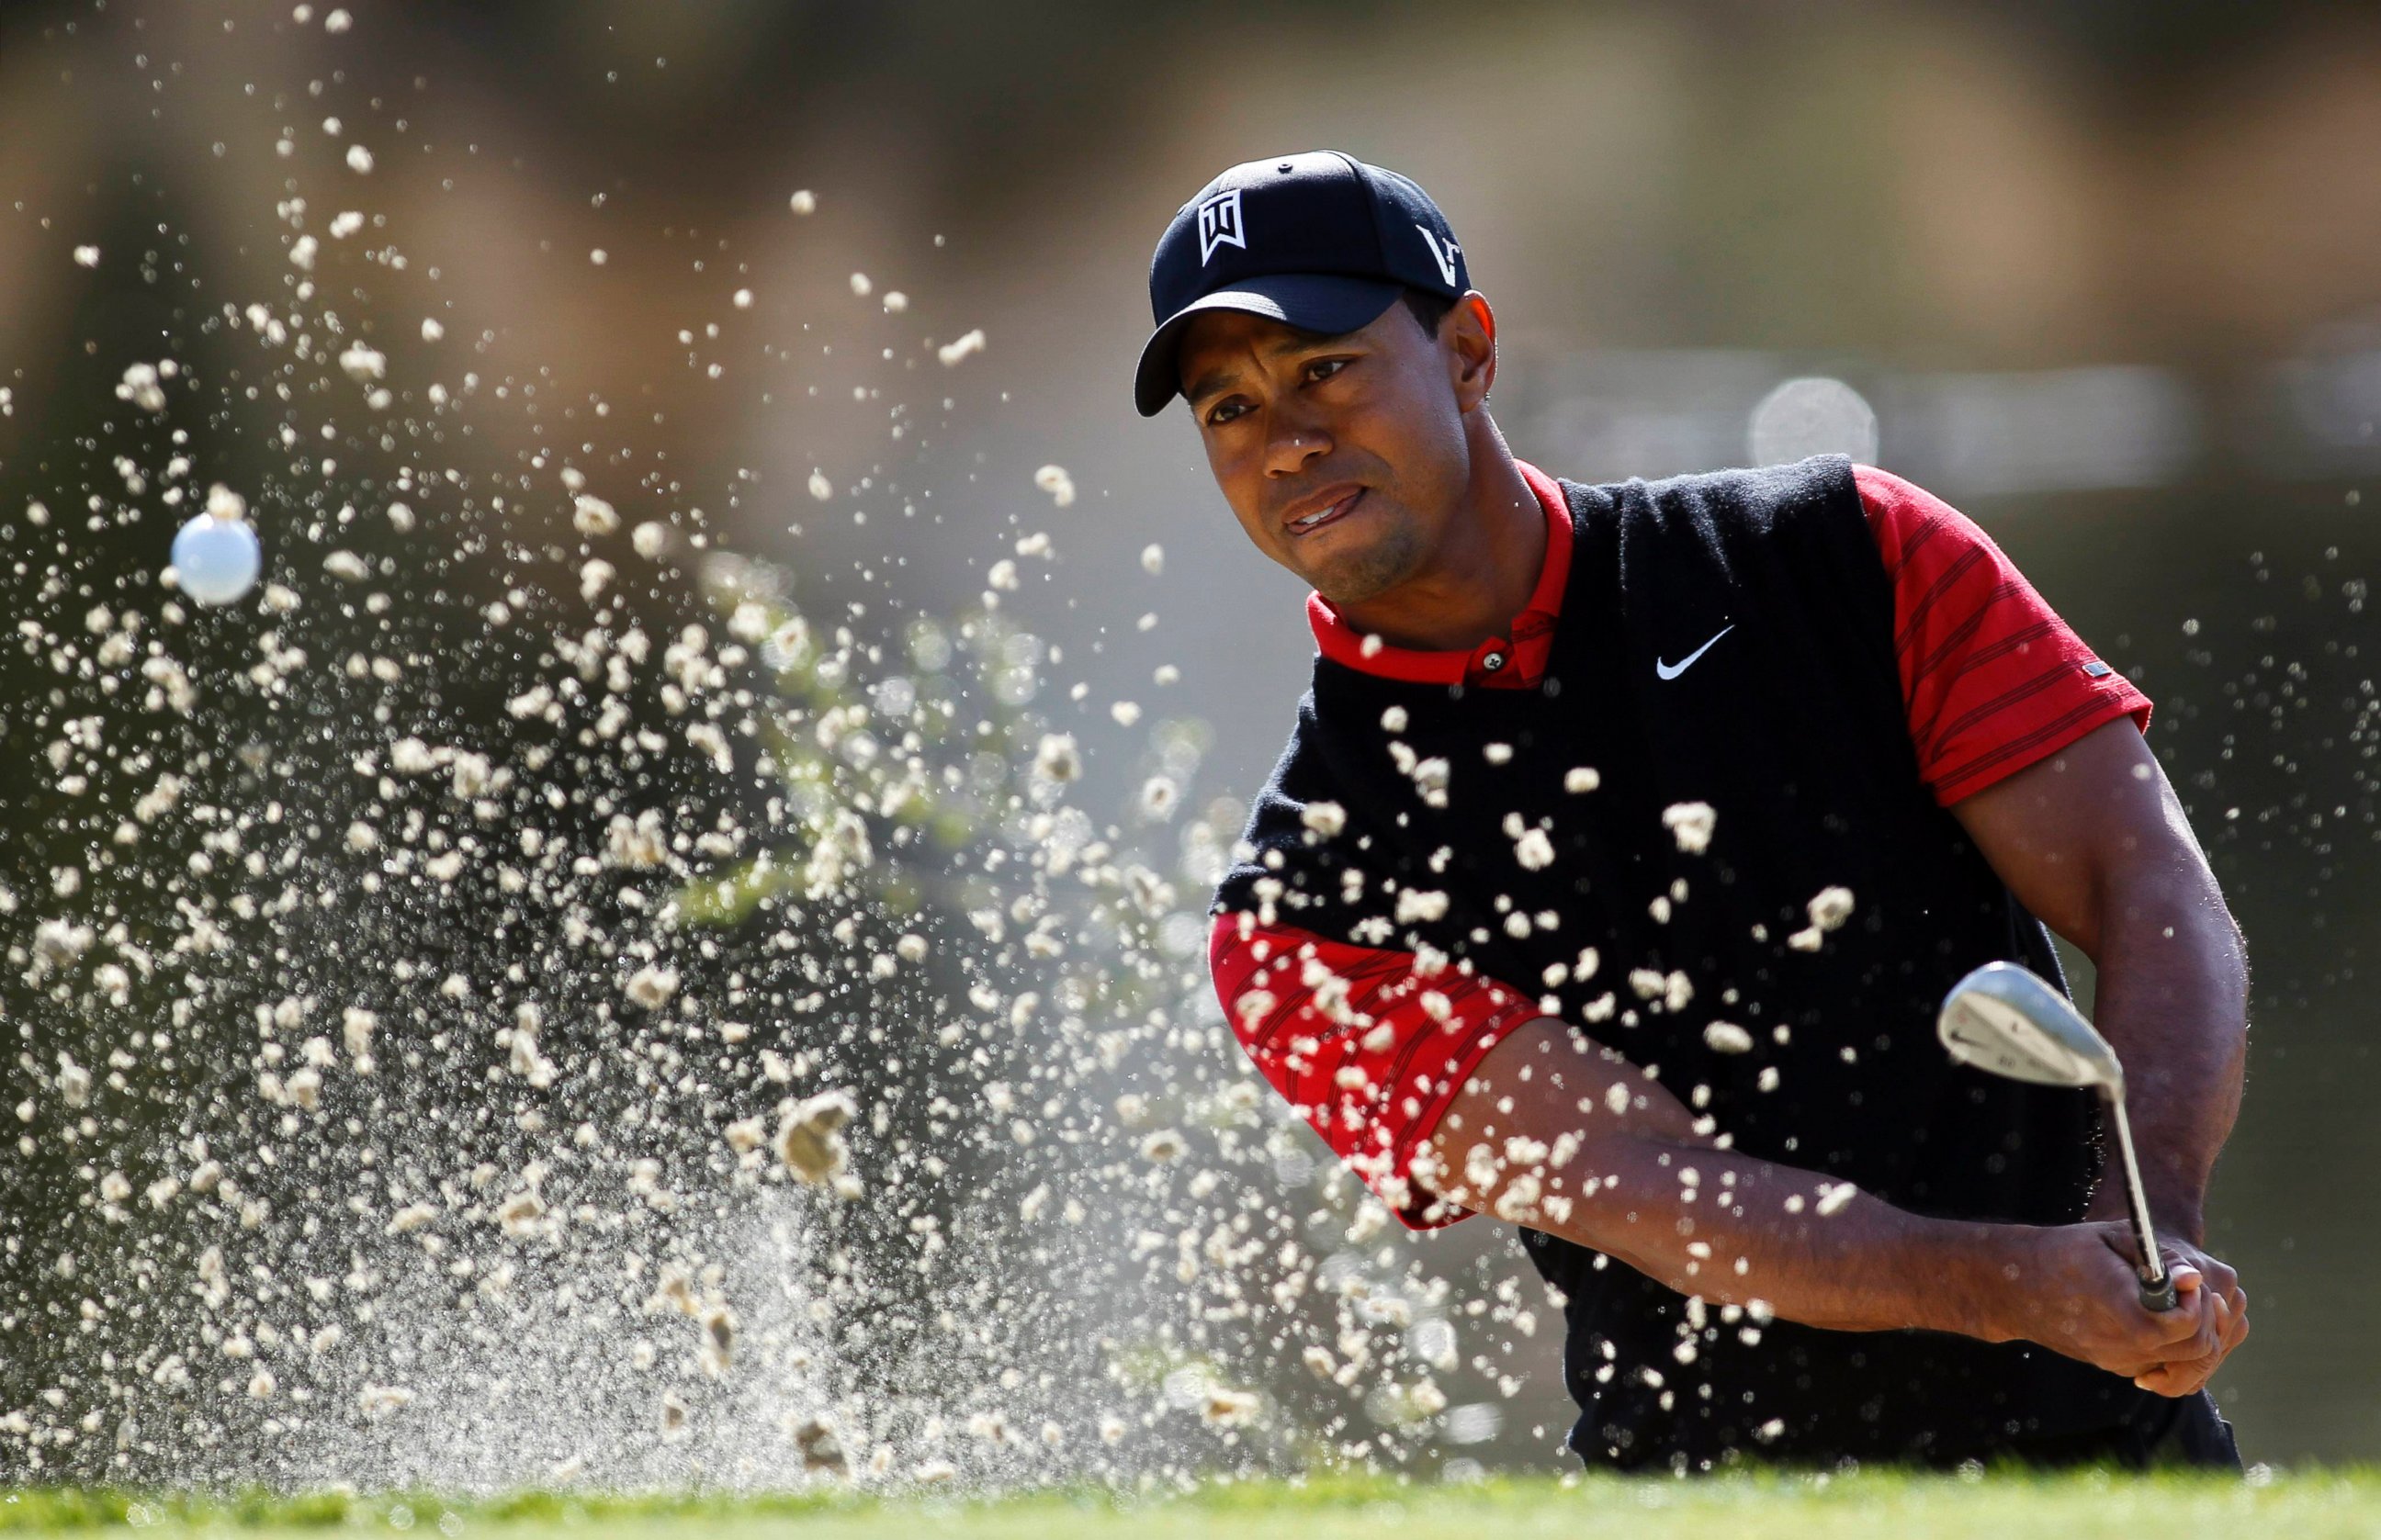 PHOTO: Tiger Woods on the third hole during the final round of the Chevron World Challenge golf tournament.